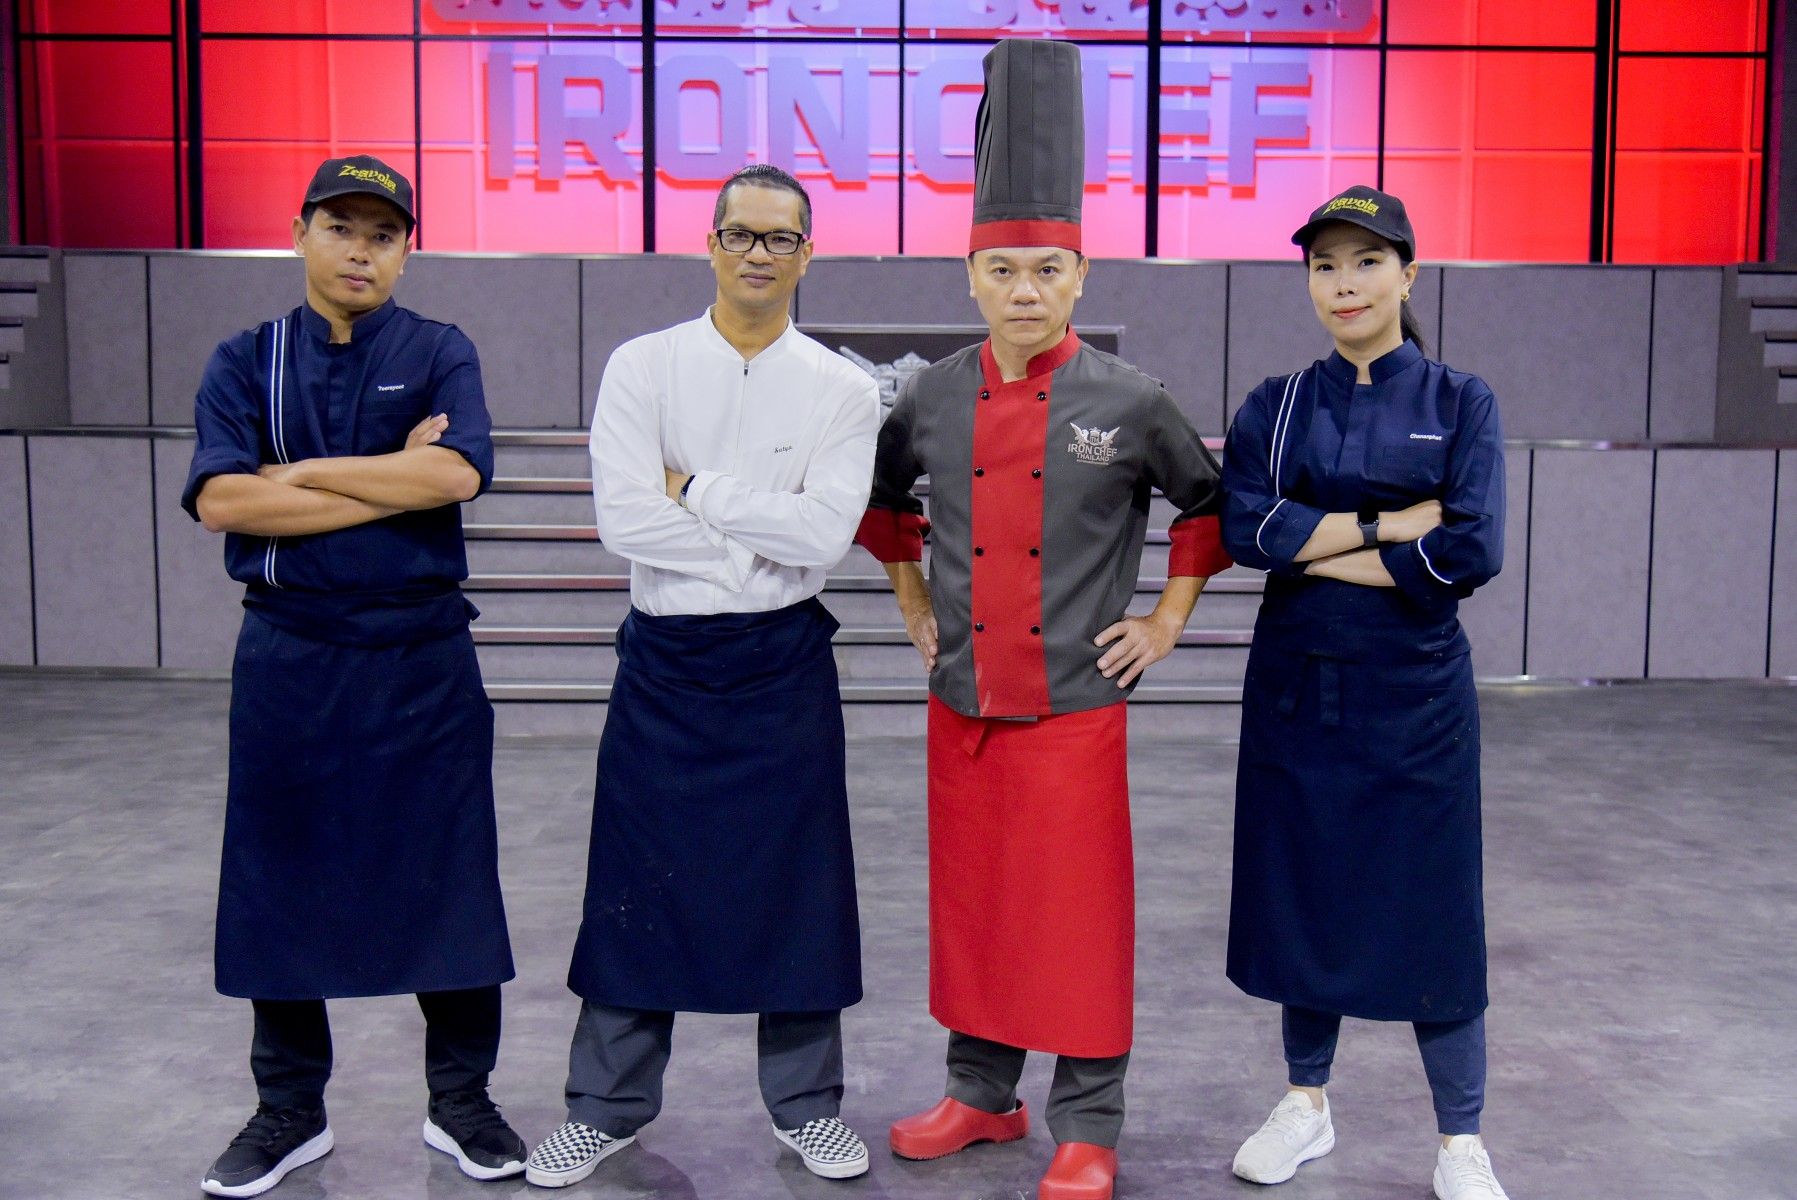 Iron Chef Reboot Series Ordered Up at Netflix